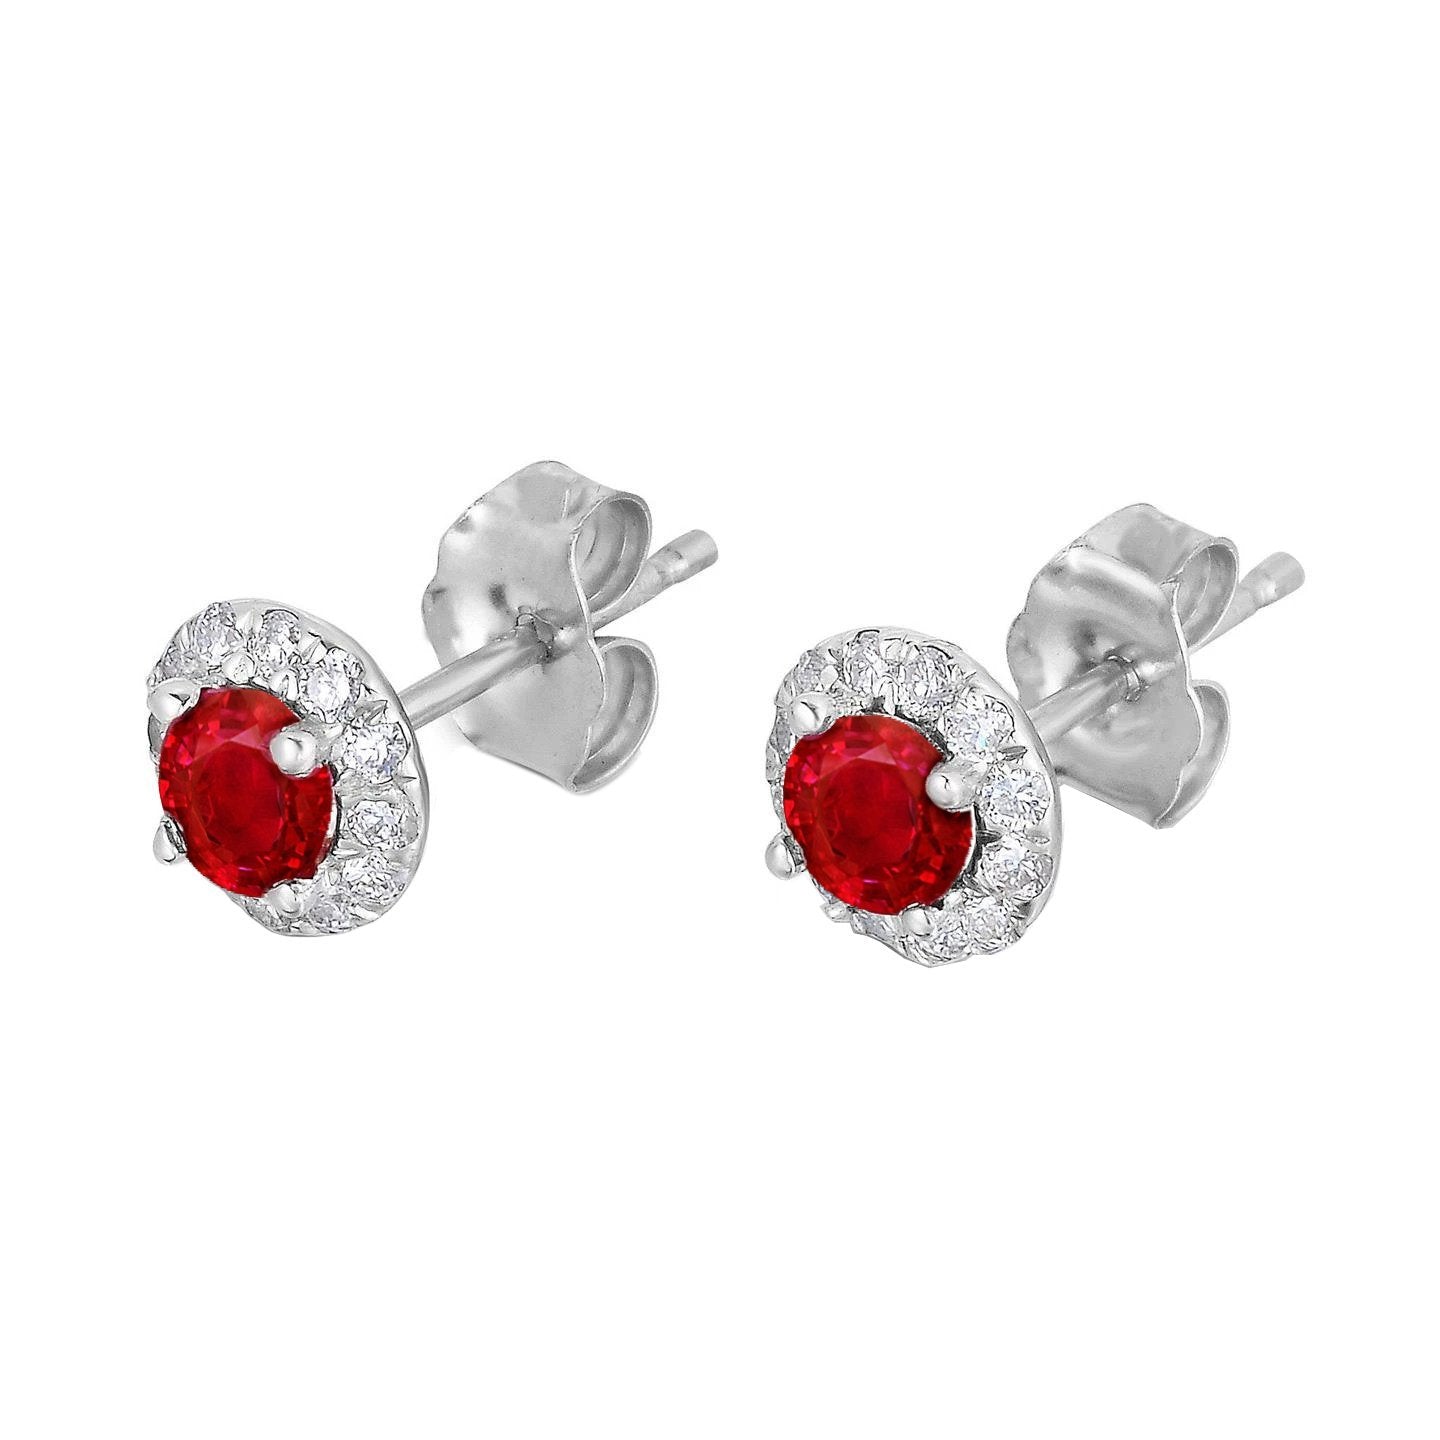 3.60 Carats Red Ruby And Diamonds Studs Earrings 14K White Gold - Gemstone Earring-harrychadent.ca